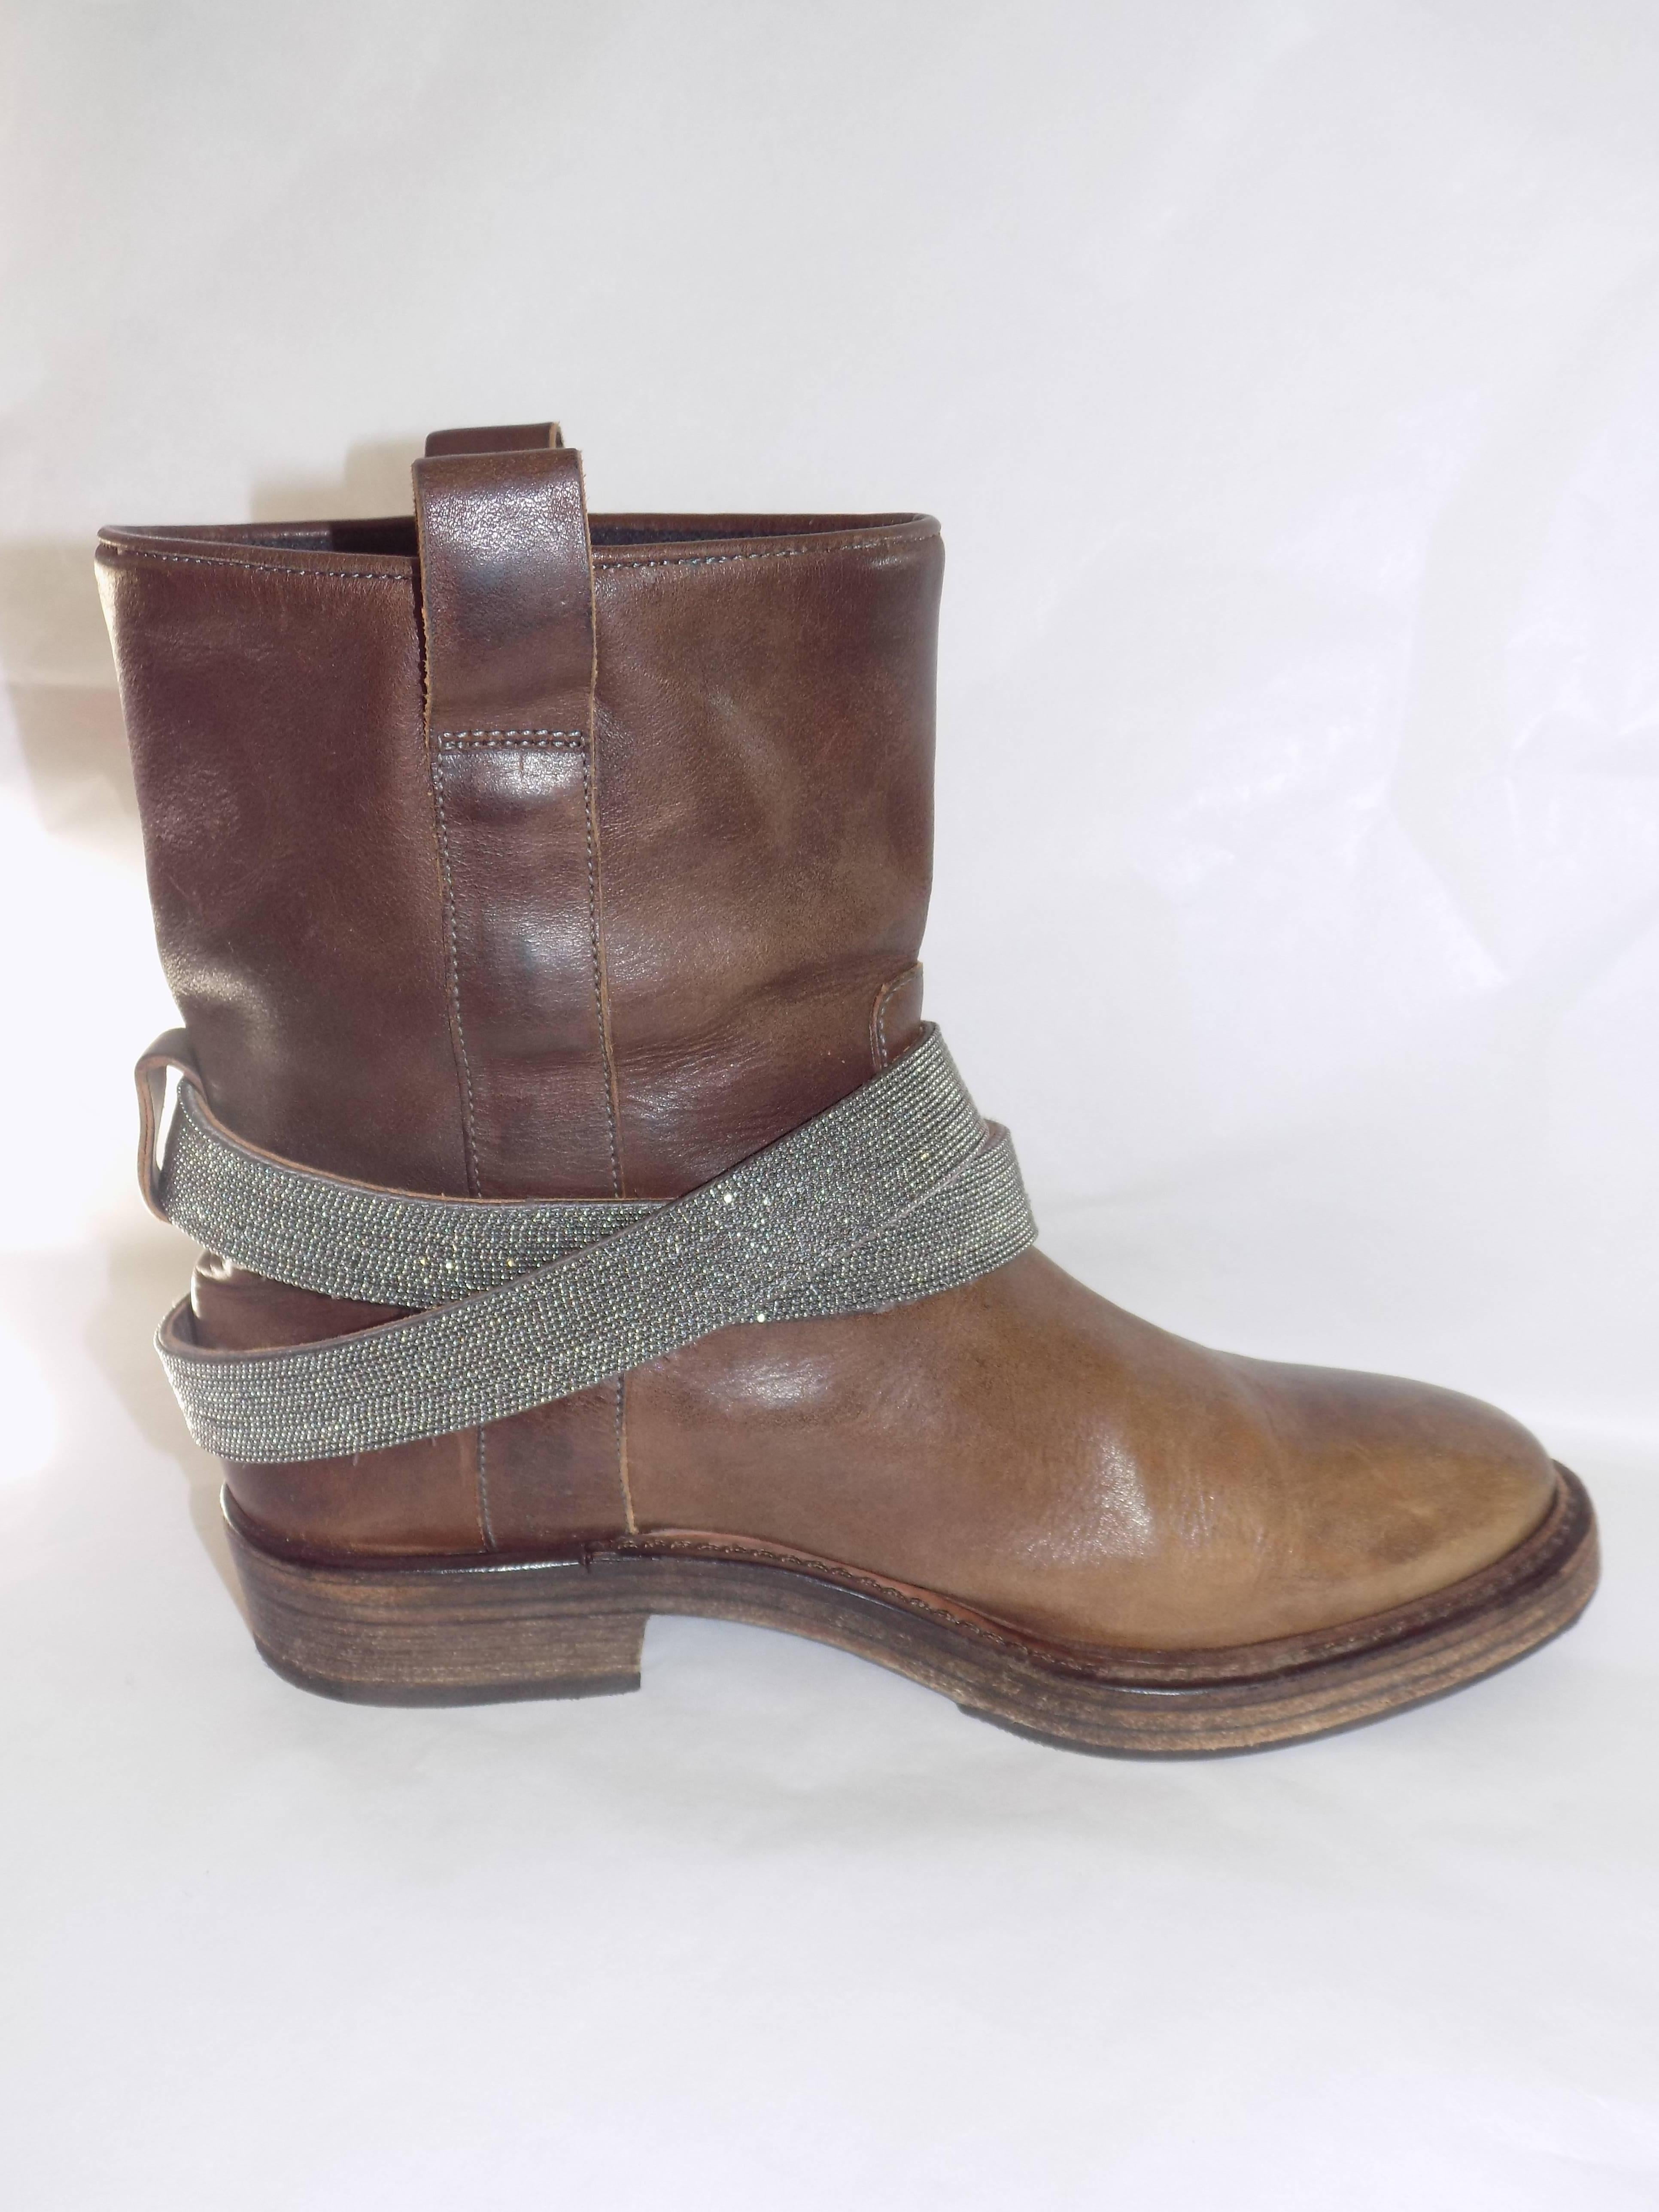 Brunello Cucinelli Leather Boots with Monili Strap Sold out Ret $1945 2